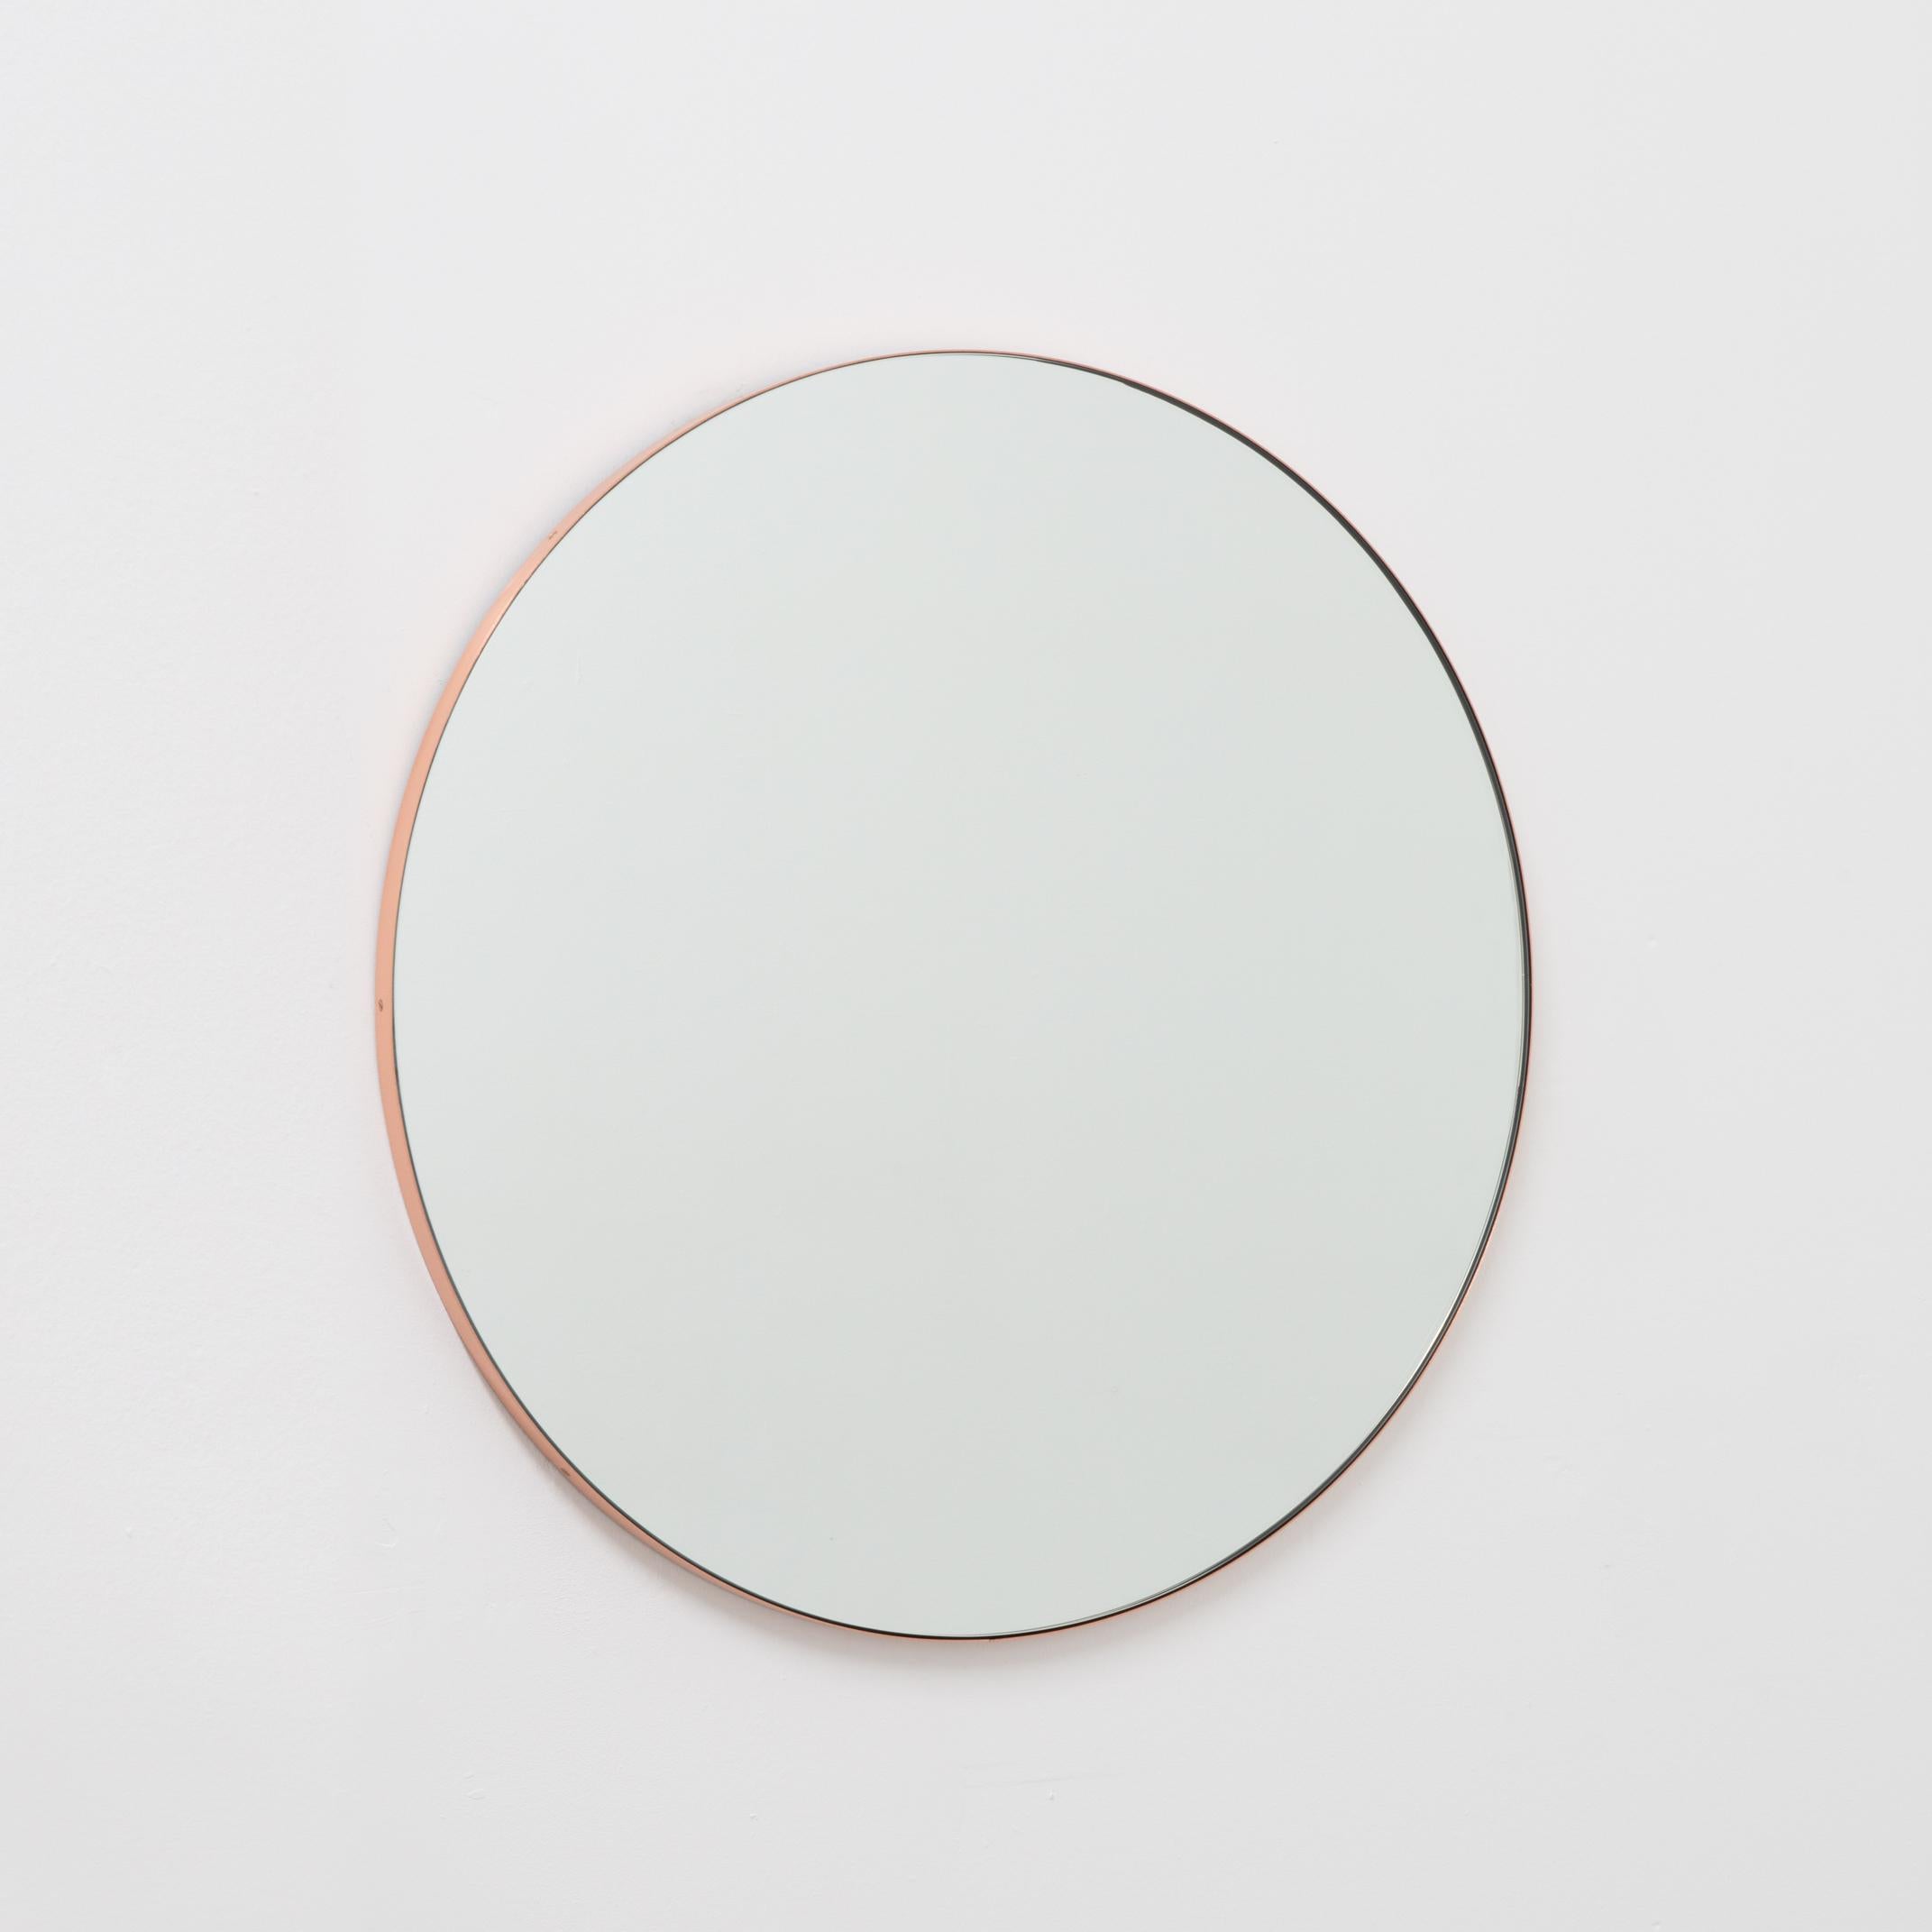 Brushed In Stock Orbis Round Handcrafted Mirror with Copper Frame, Medium For Sale